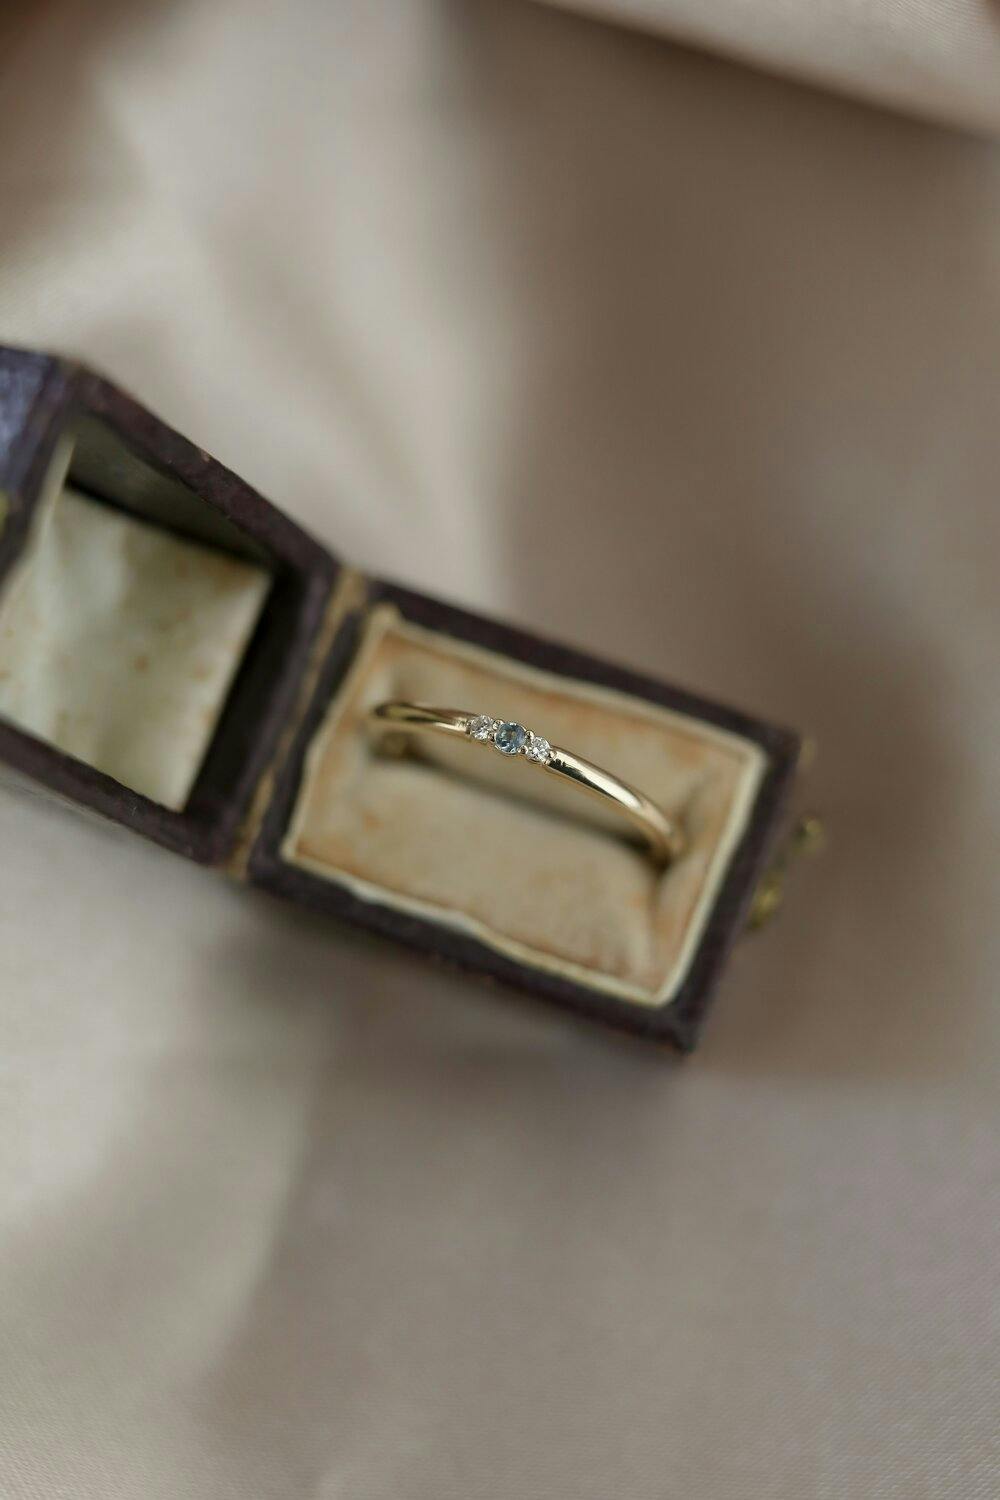 a gold band with the aquamarine stone